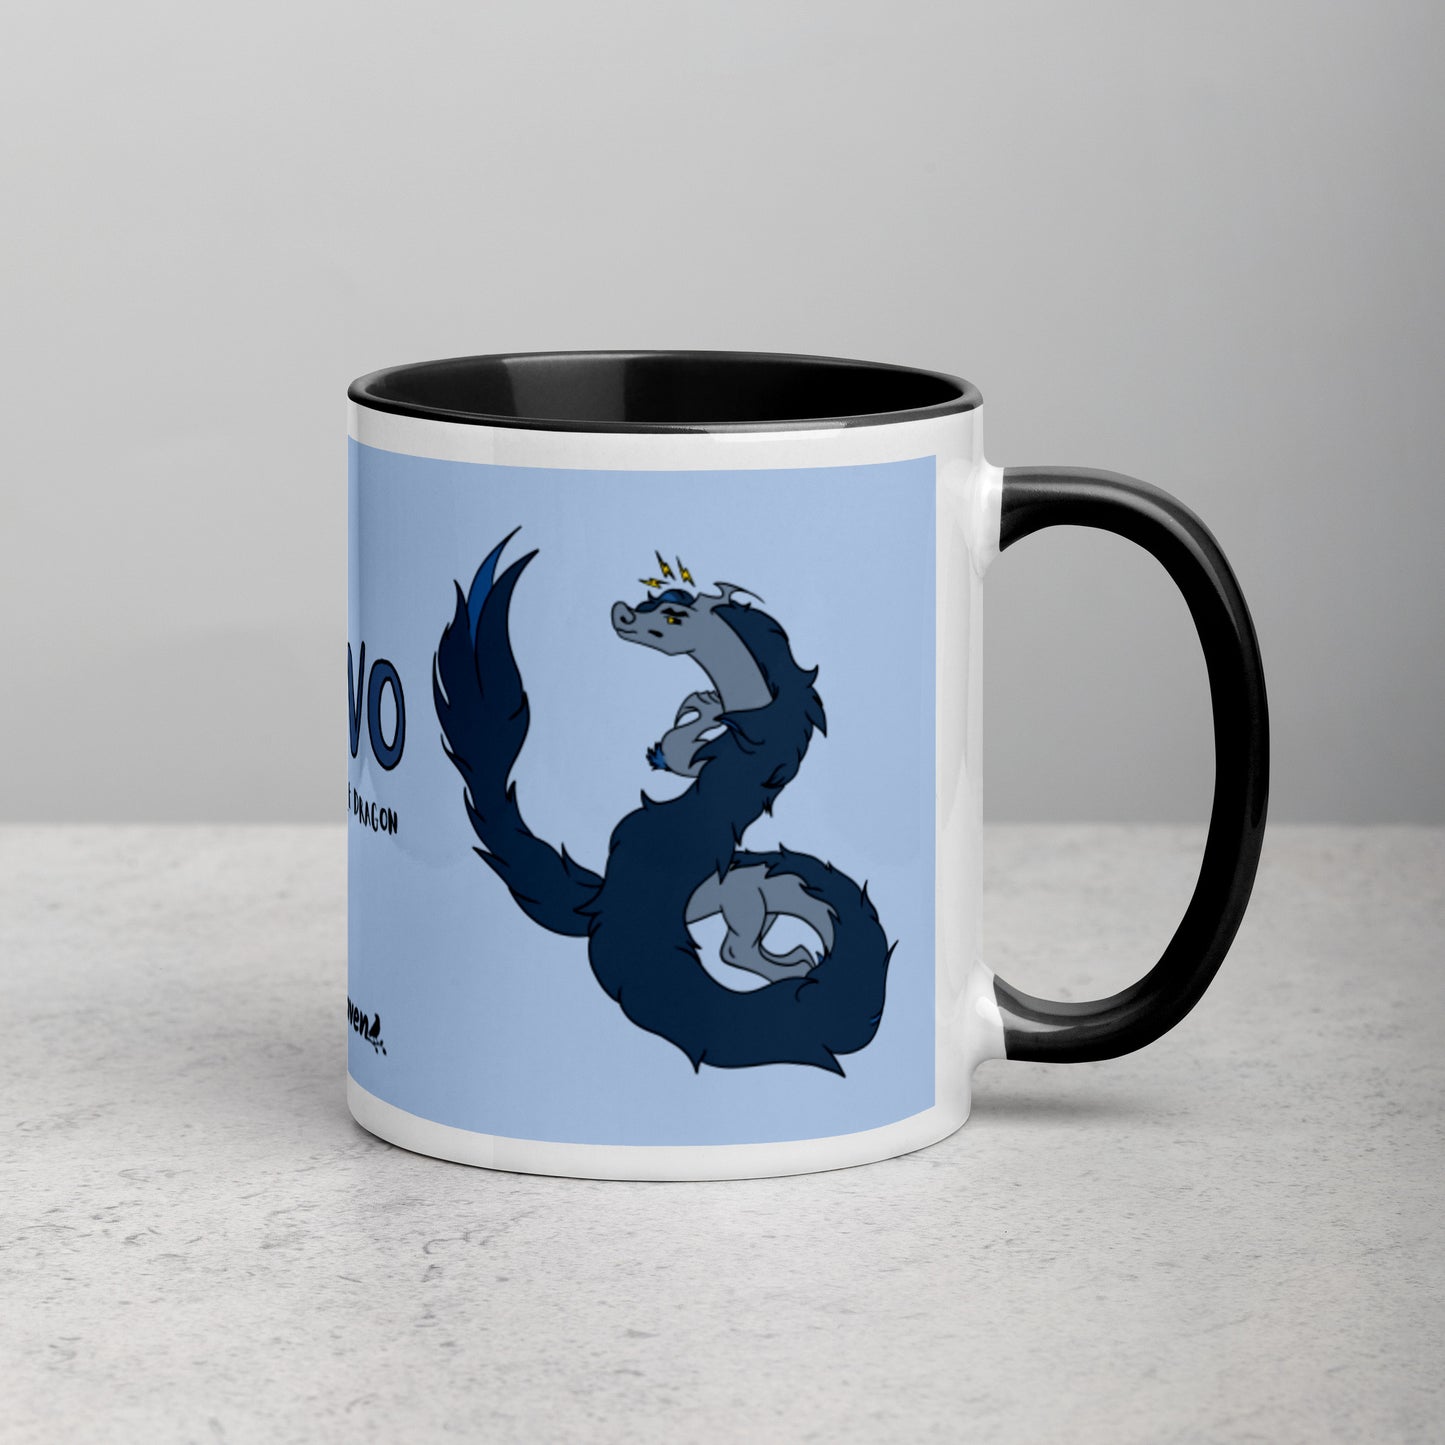 11 ounce ceramic mug featuring a double-sided image of angry Korvo the Fuzzy Noodle dragon against a light blue background.  Black inside and handle. Sitting on tabletop with handle facing right.